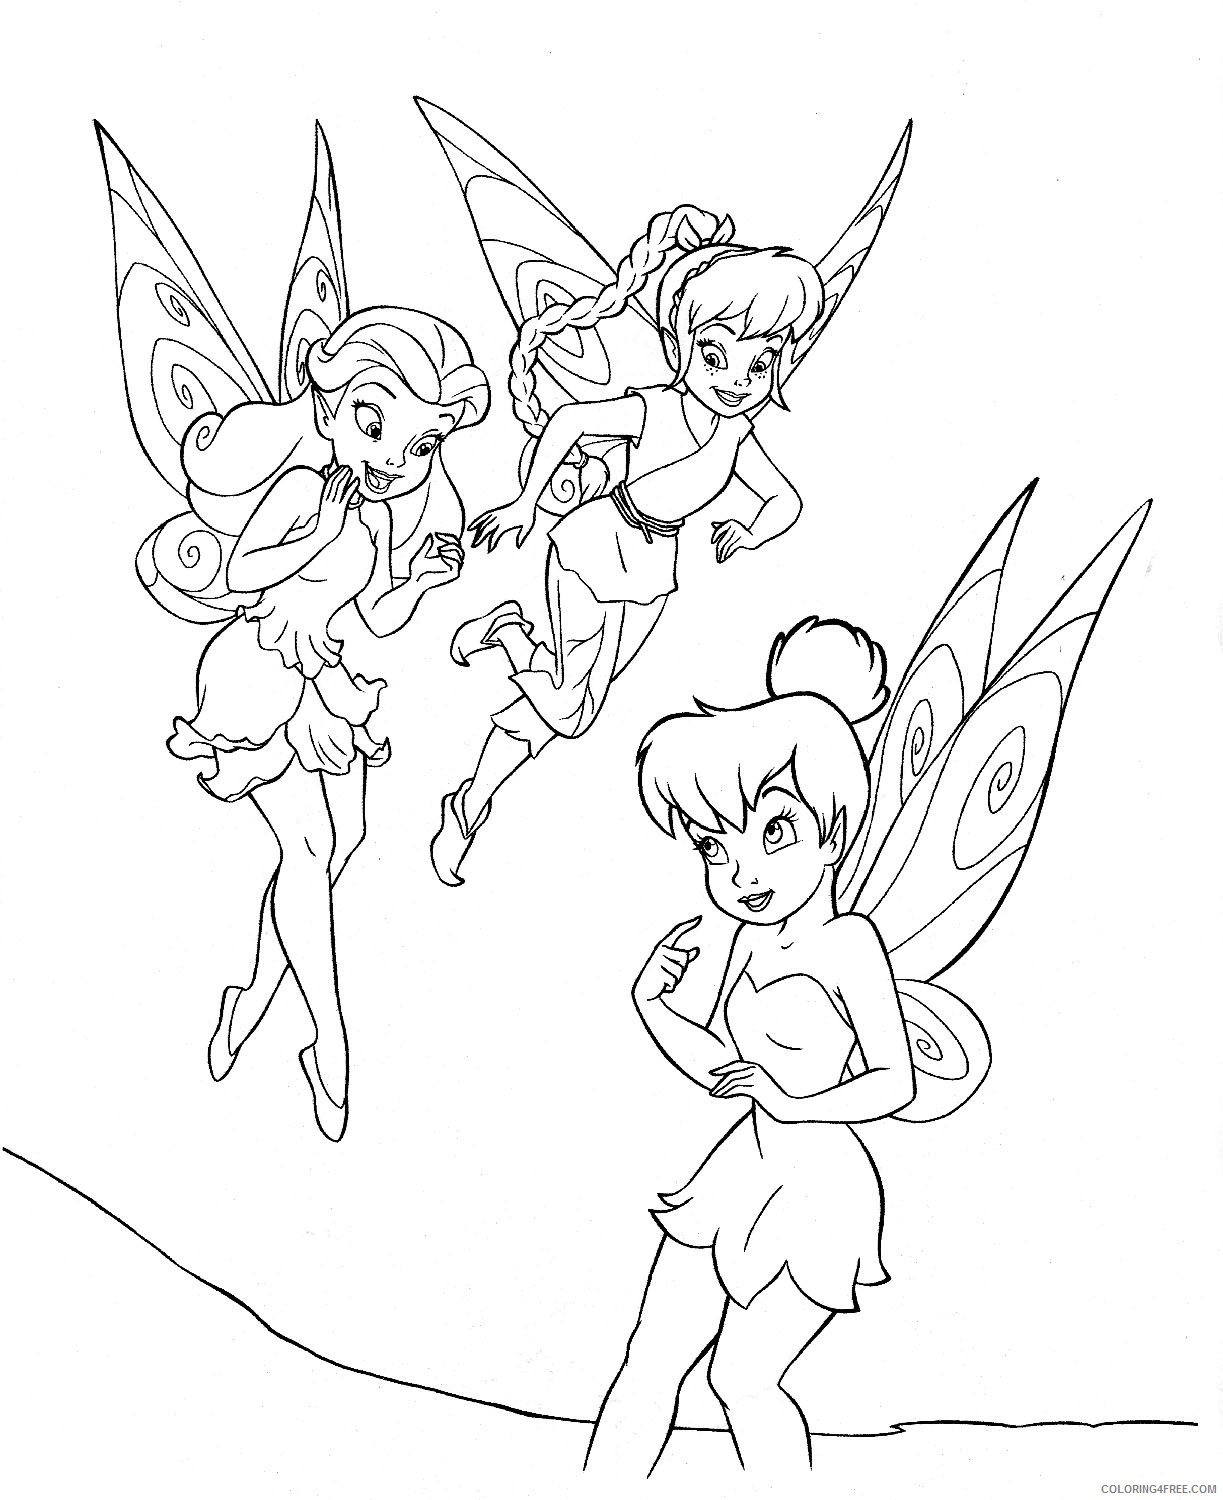 Tinker Bell Coloring Pages Cartoons Tinkerbell and Friends Printable 2020 6648 Coloring4free